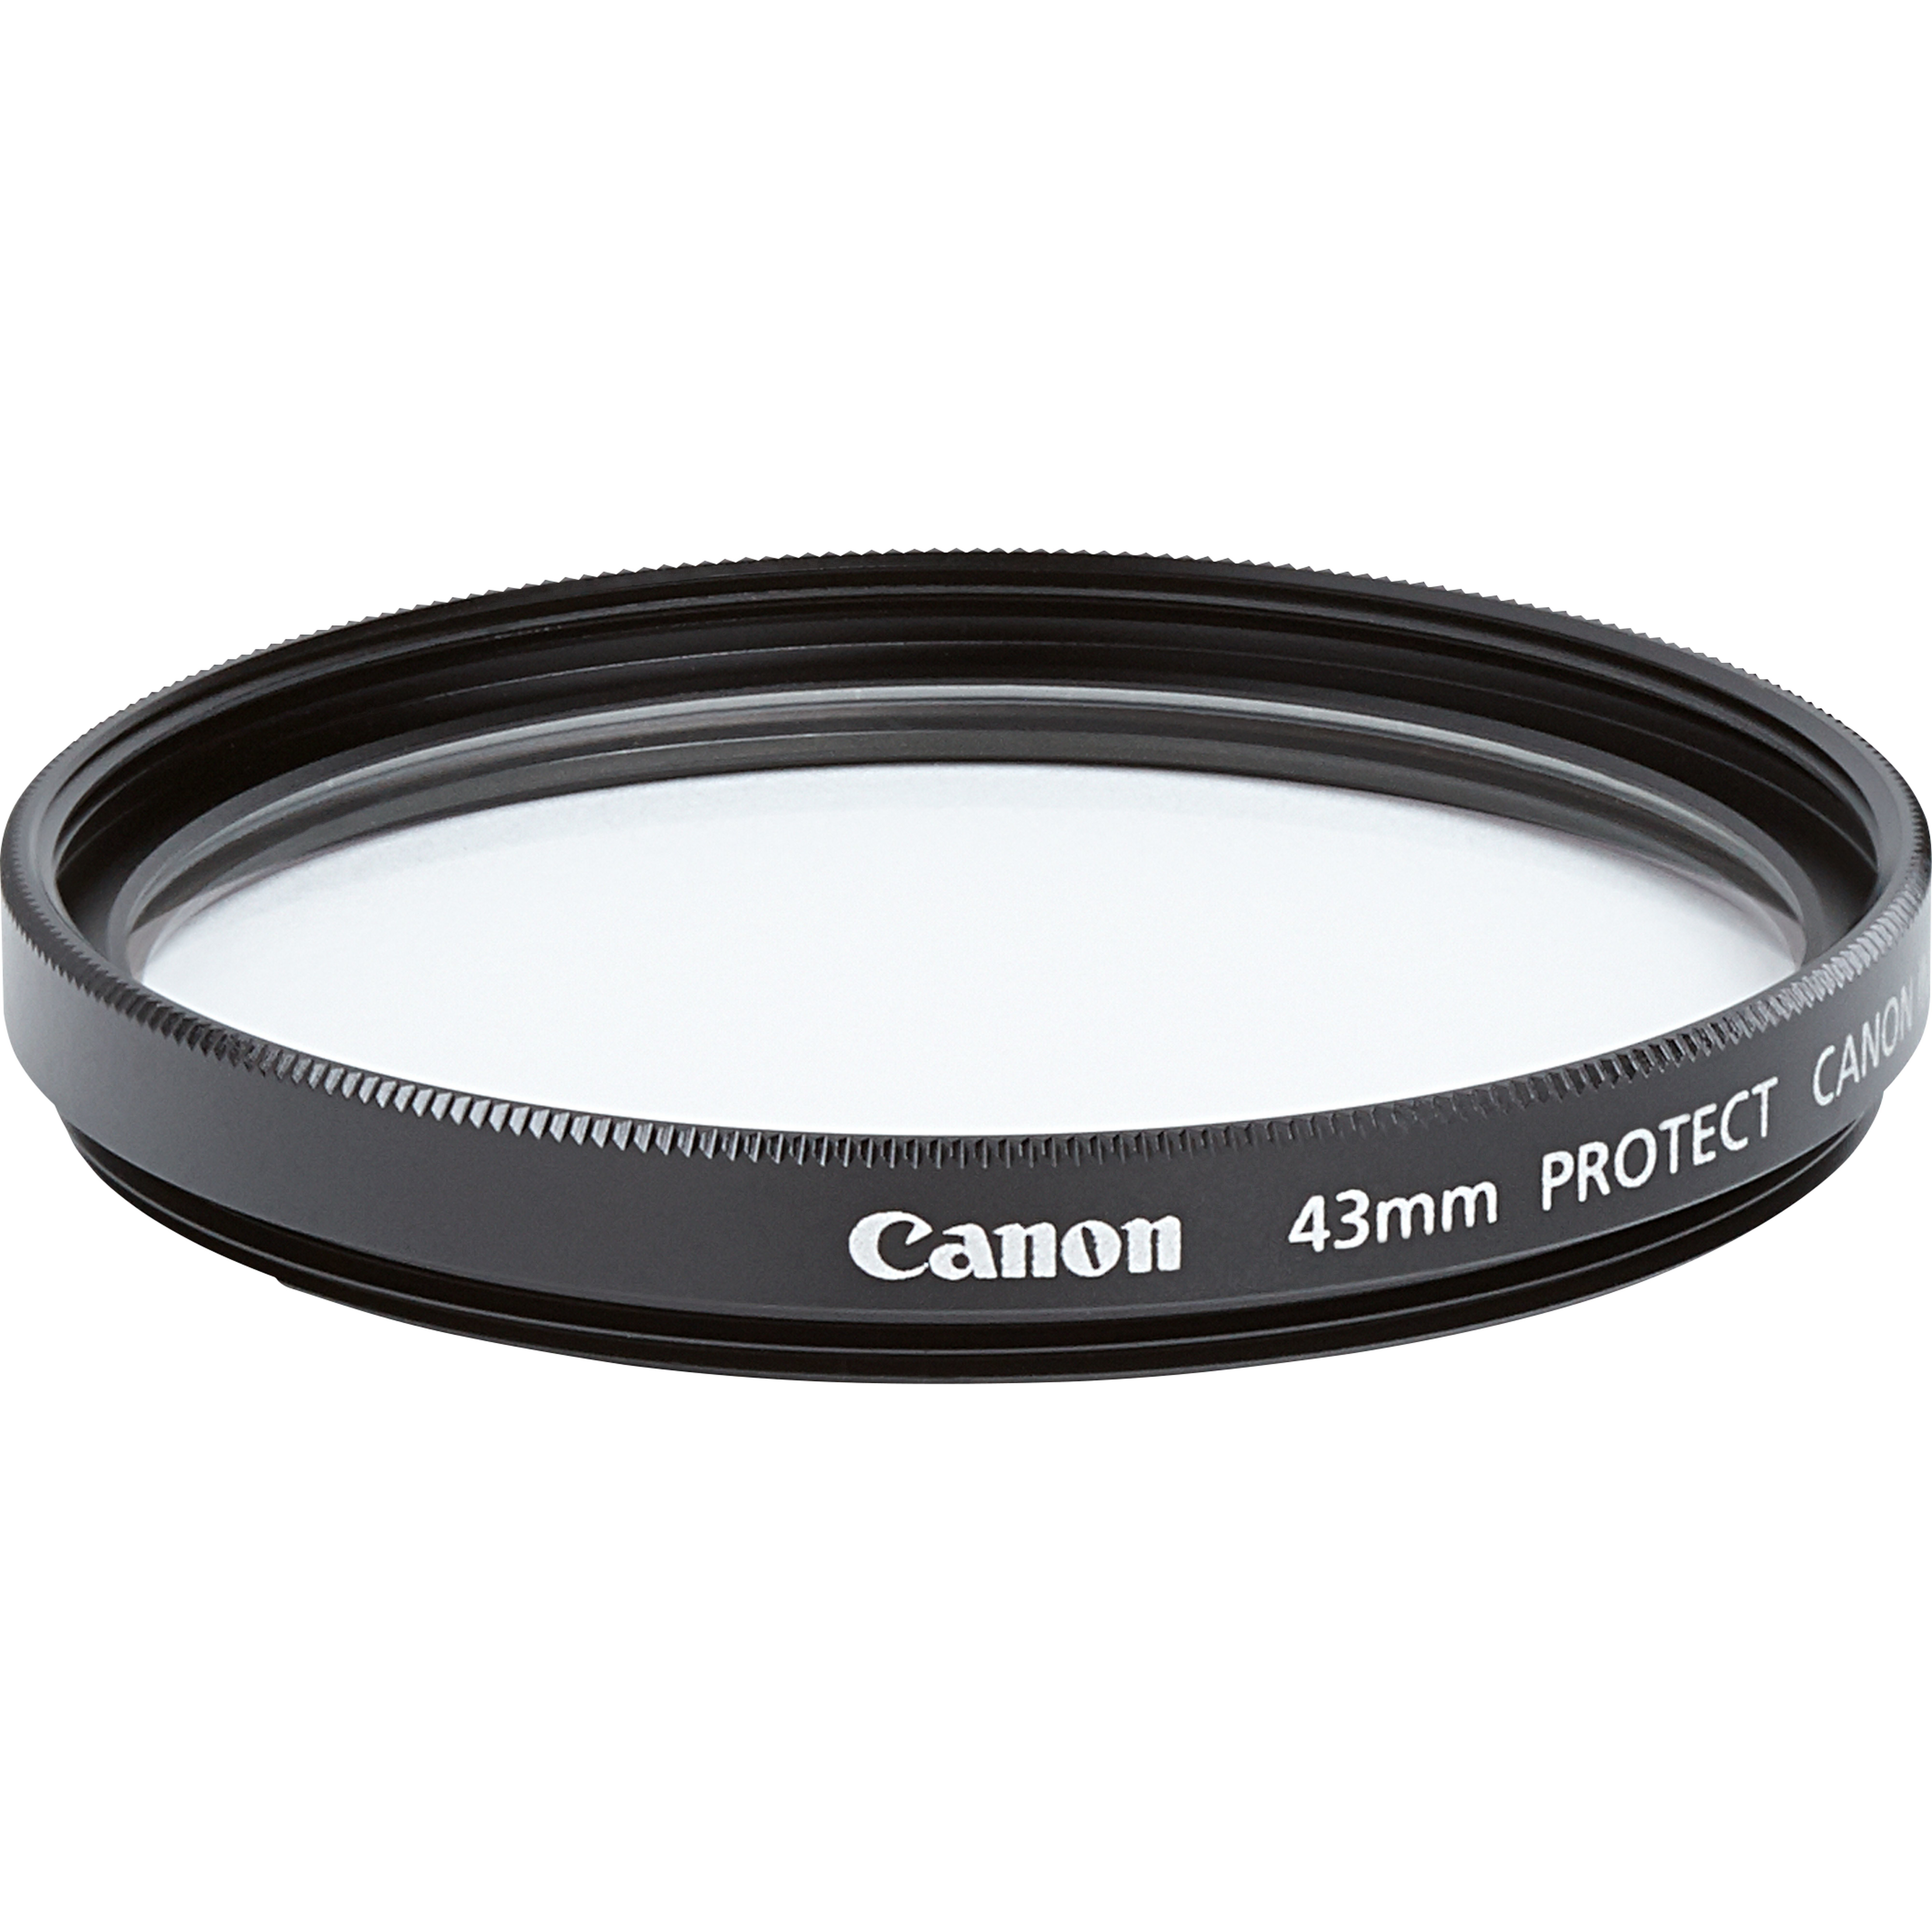 Canon - Filter - protection - 43 mm - for EF-M